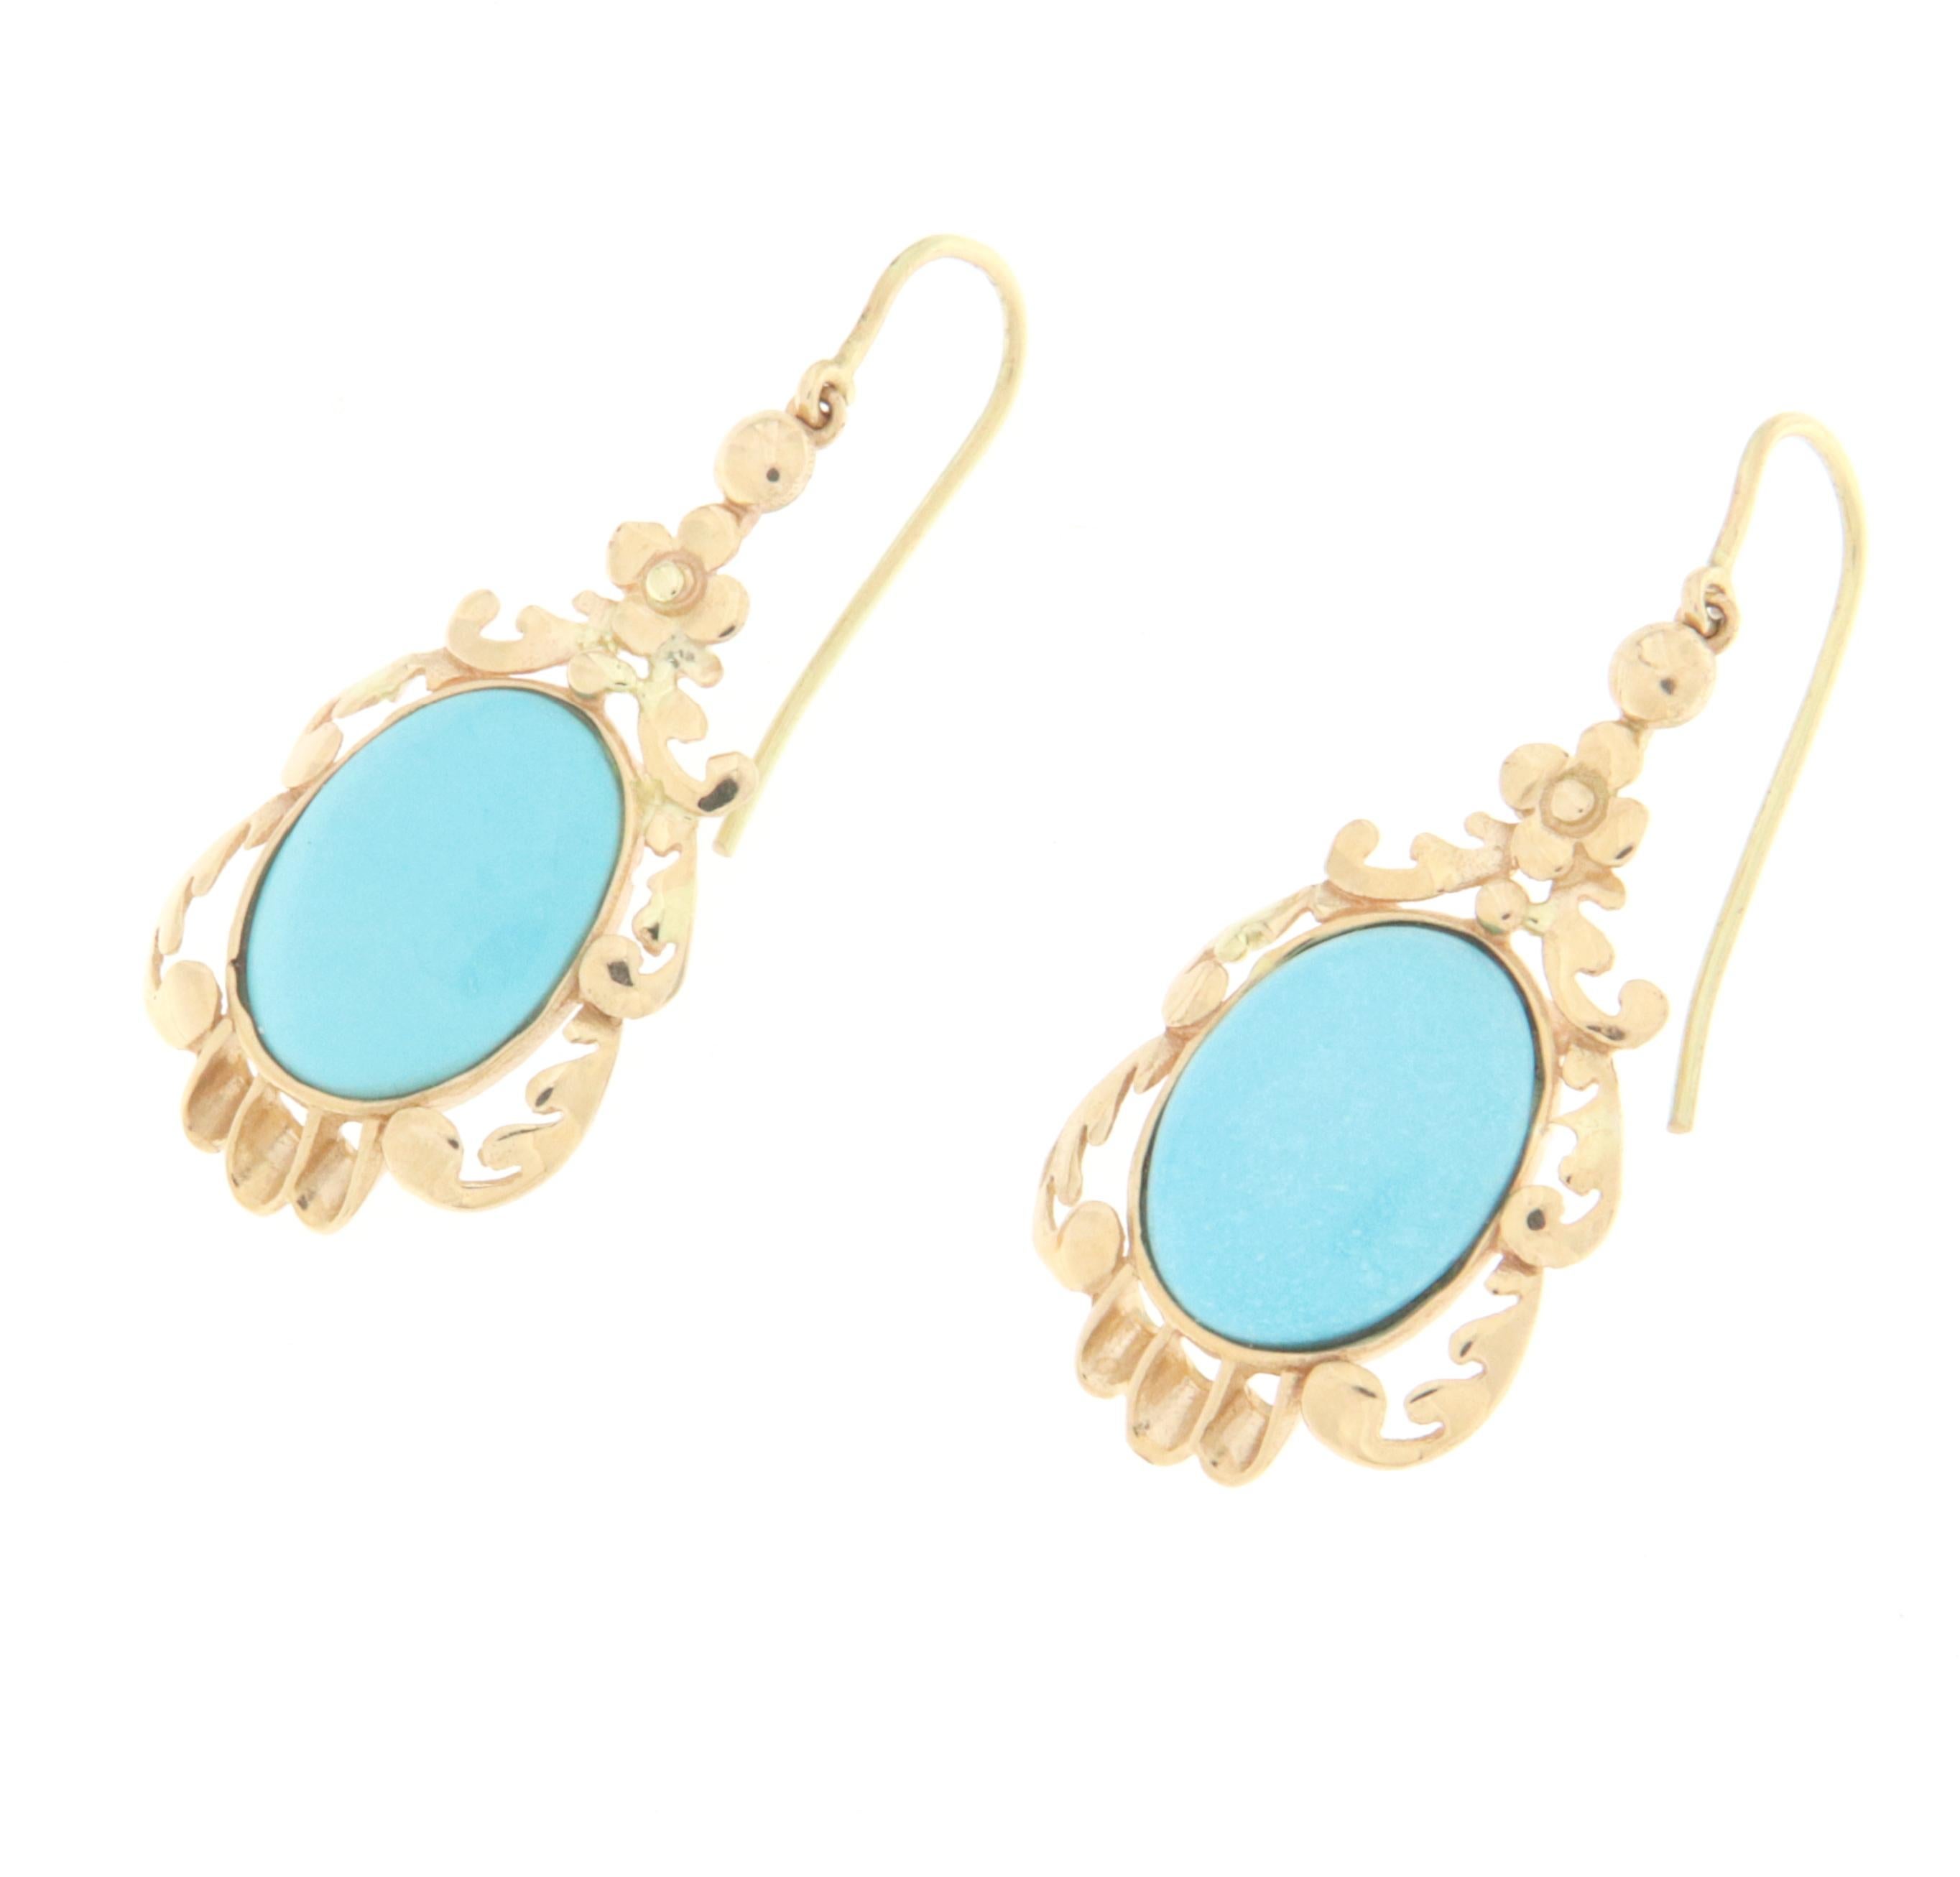 For any problems related to some materials contained in the items that do not allow shipping and require specific documents that require a particular period, please contact the seller with a private message to solve the problem.

Splendid earring